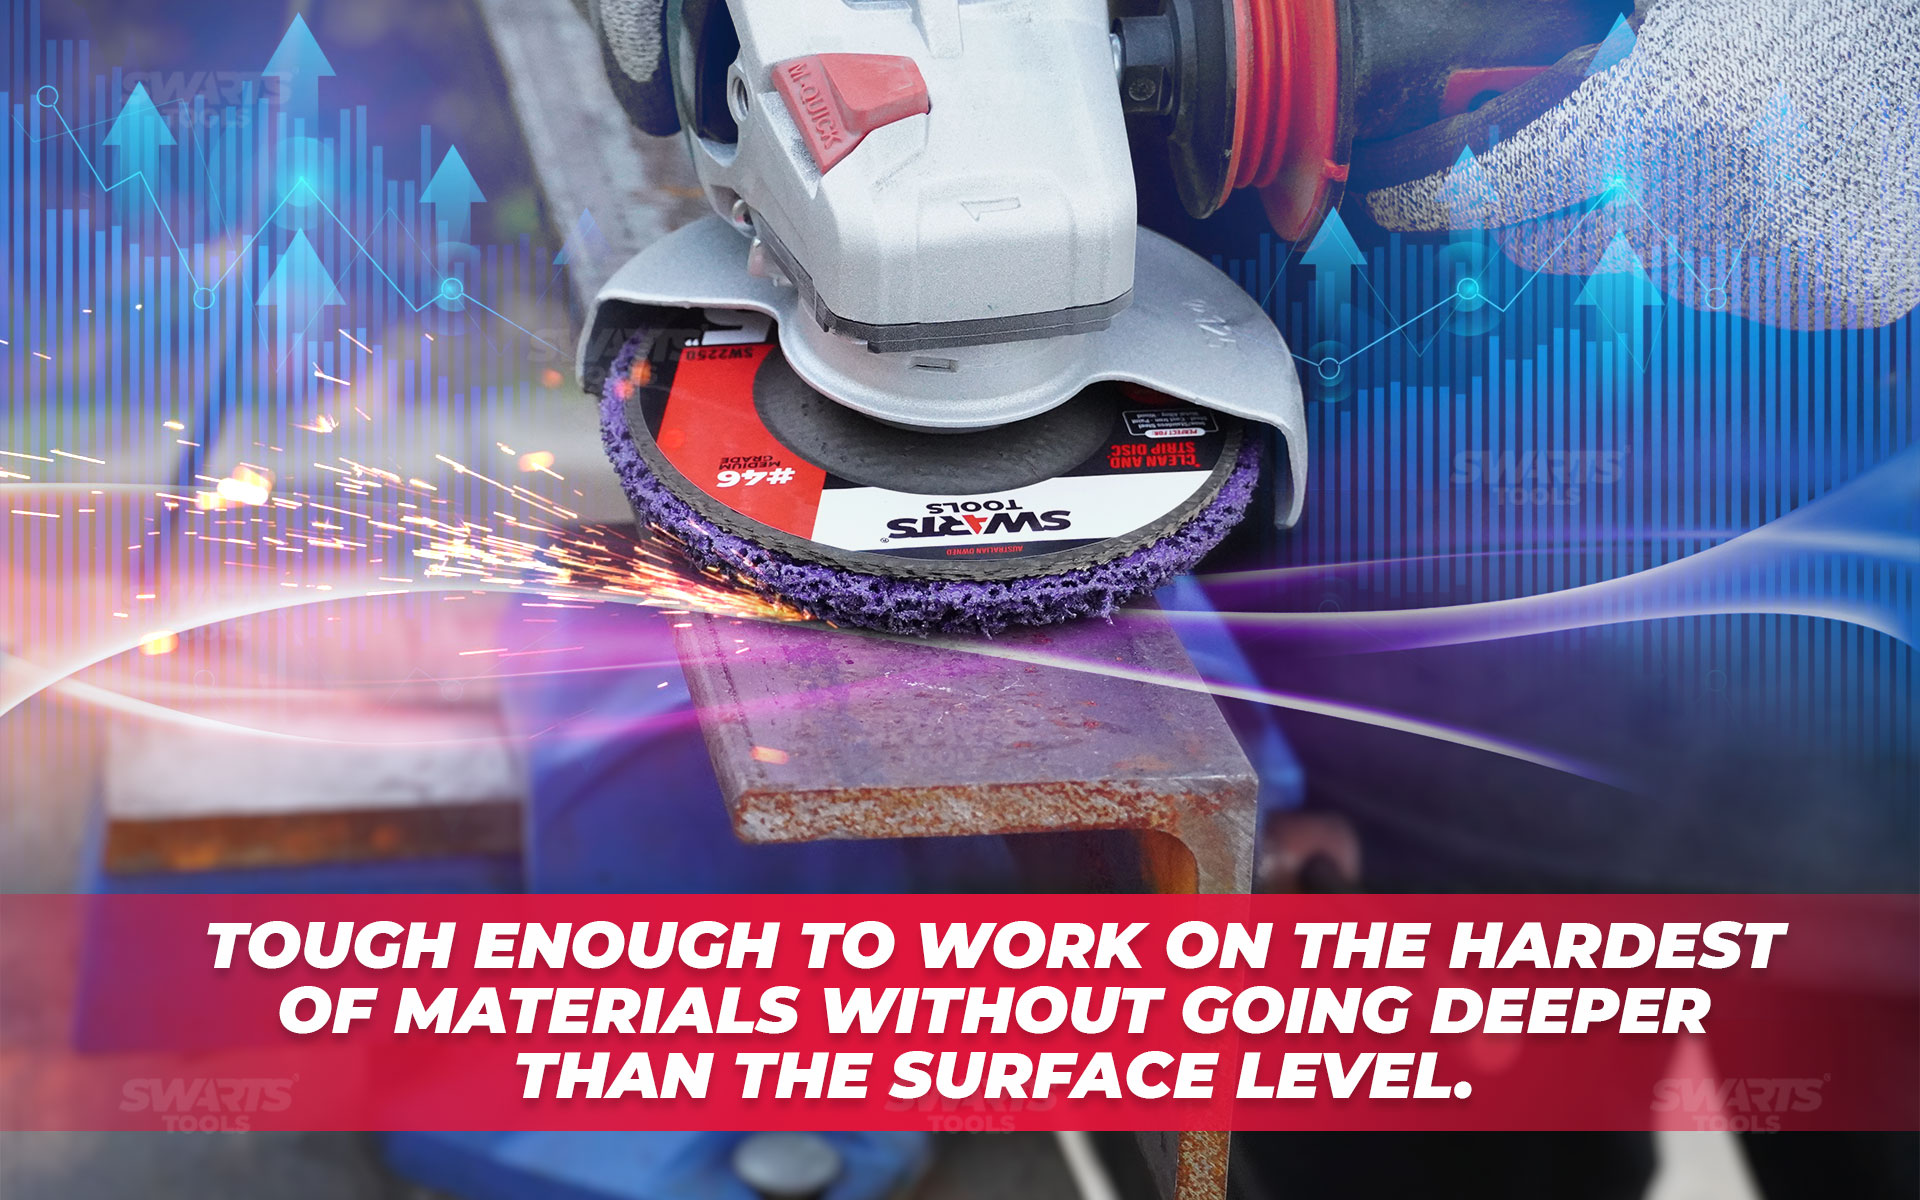 Tough enough to work on the hardest of materials without going deepeer than the surface level